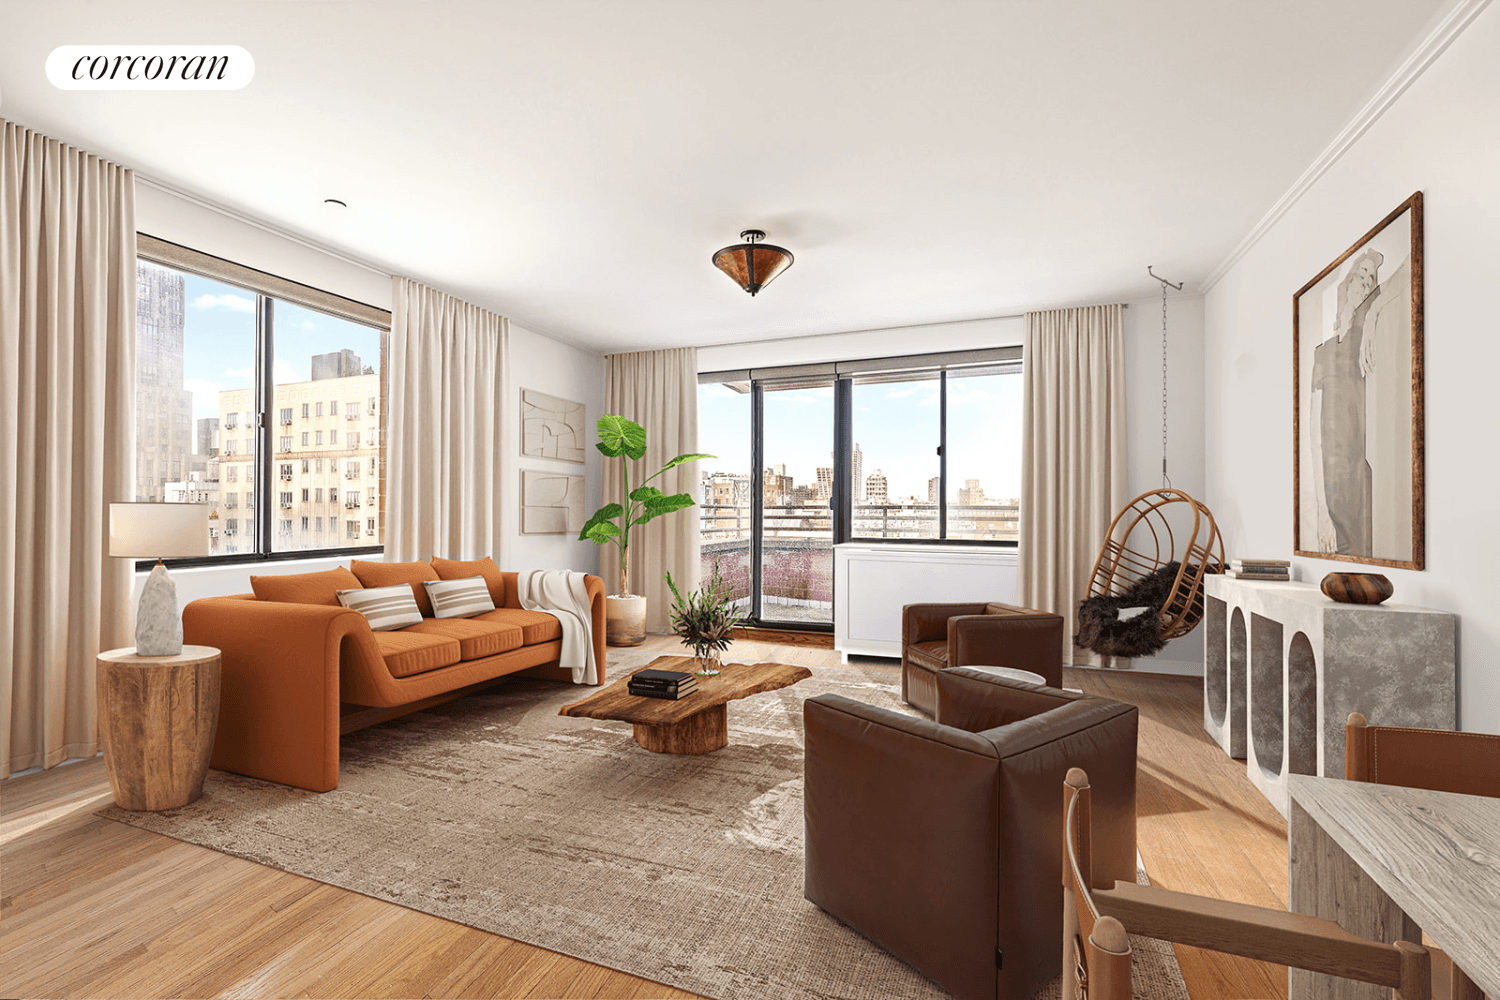 Sun Drenched 1 Bedroom Home Office in a Fantastic Boutique Chelsea Condo BuildingApartment Features Absolutely flooded with natural light providing the apartment with incredible energy.